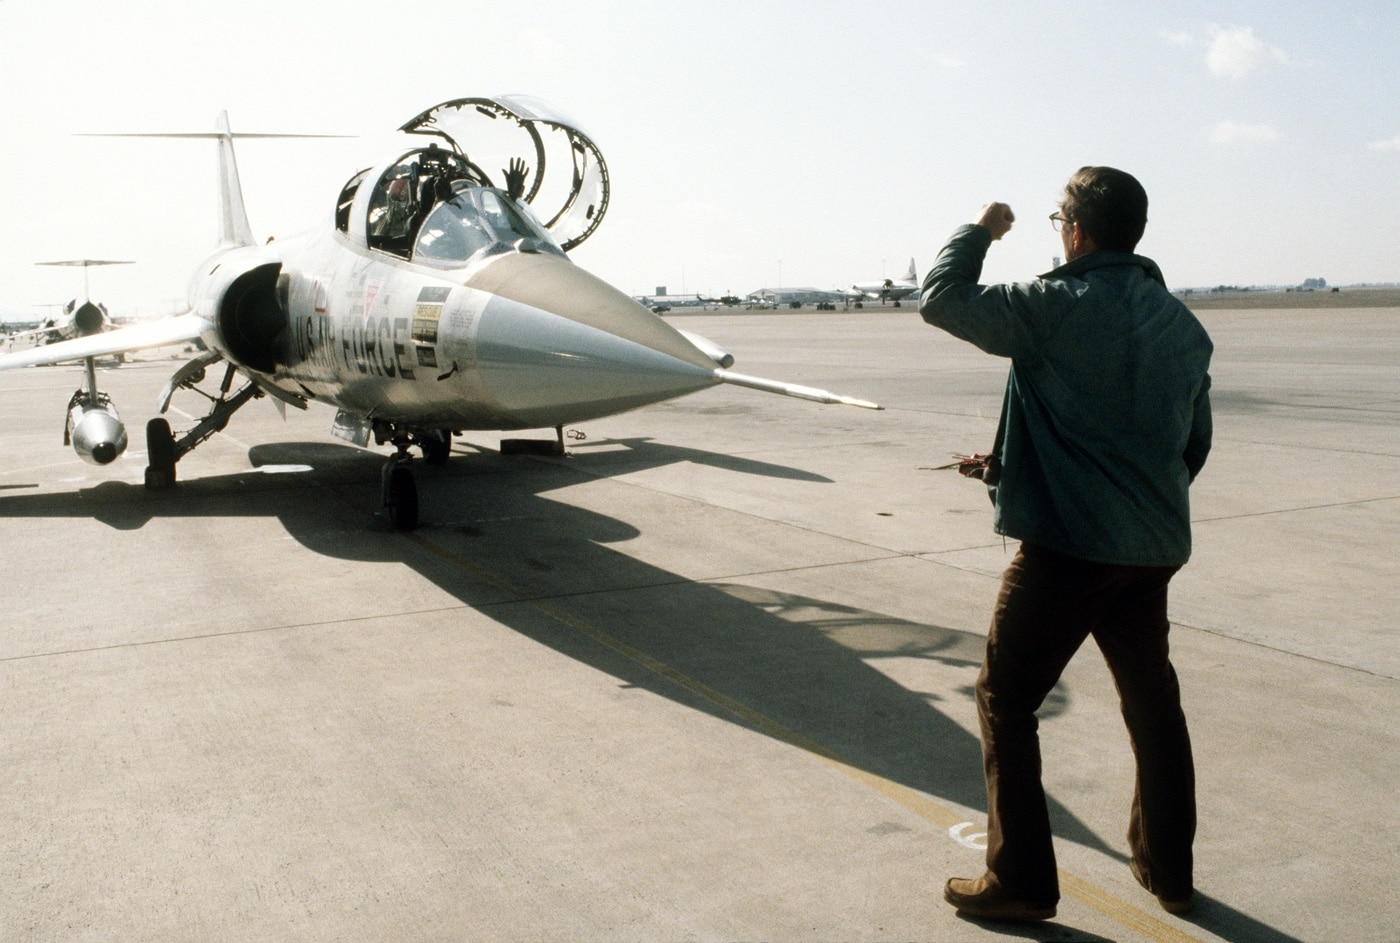 In this color photograph, we see a U.S. Air Force crew chief directs an F-104G Starfighter fighter plane onto the runway during the training of German pilots by the 69th Tactical Fighter Training Squadron in 1982.